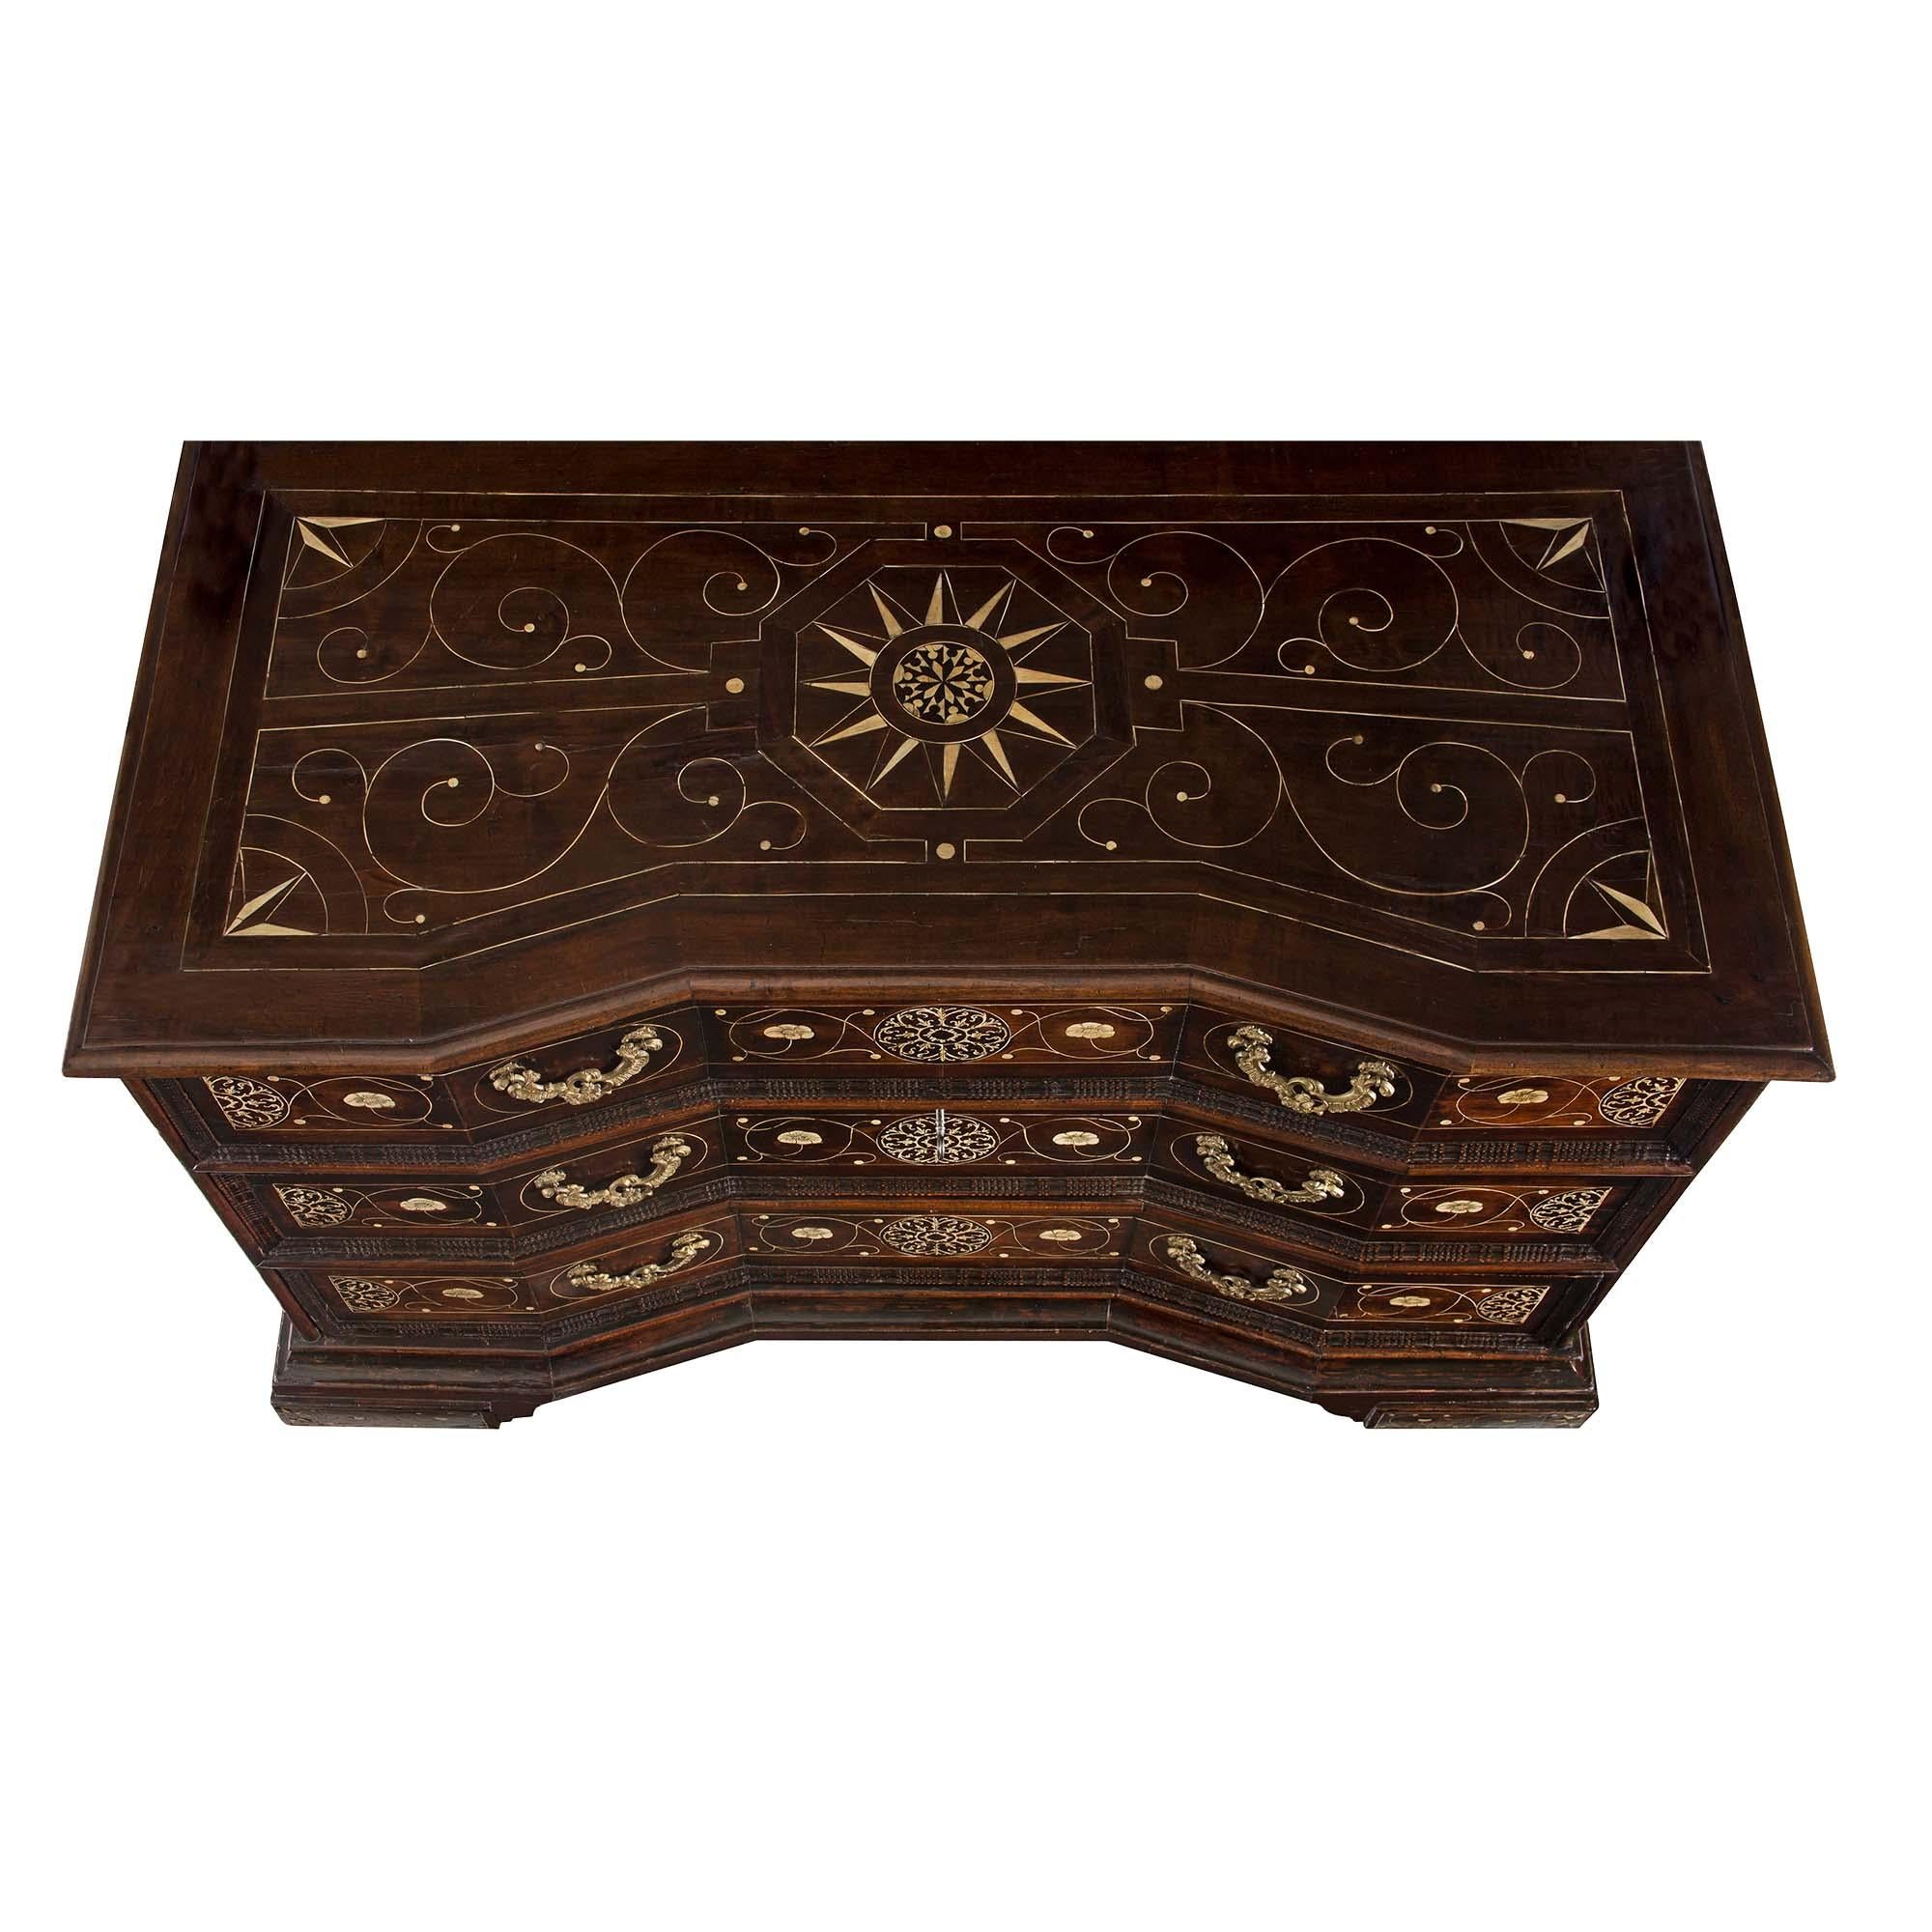 A very handsome and high quality Italian 18th century ebonized fruitwood Milanese commode with very decorative intricate bone inlay throughout. The chest is supported by four large square feet with floral inlay. Each of the angle cut three drawers